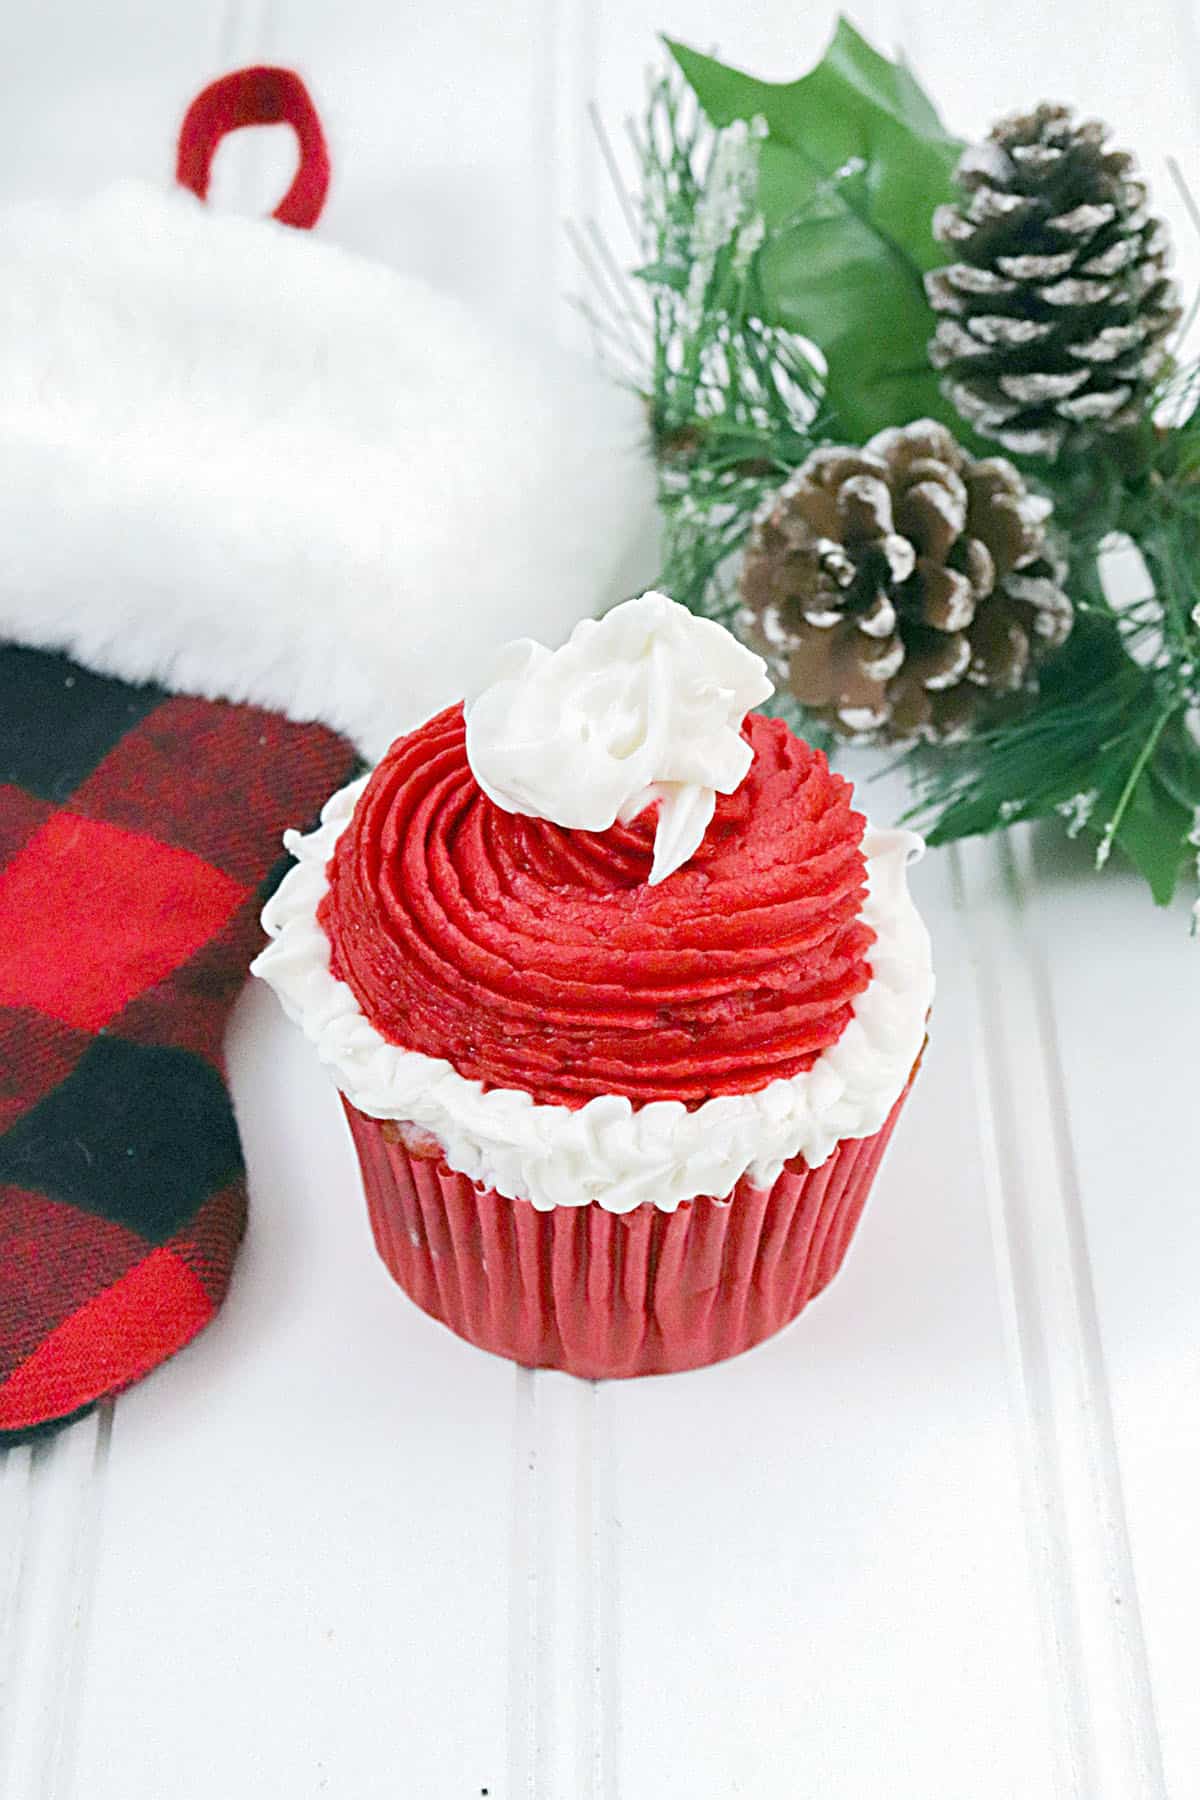 A single red and white cupcake sits in between a plaid stocking and some greenery on the right. 